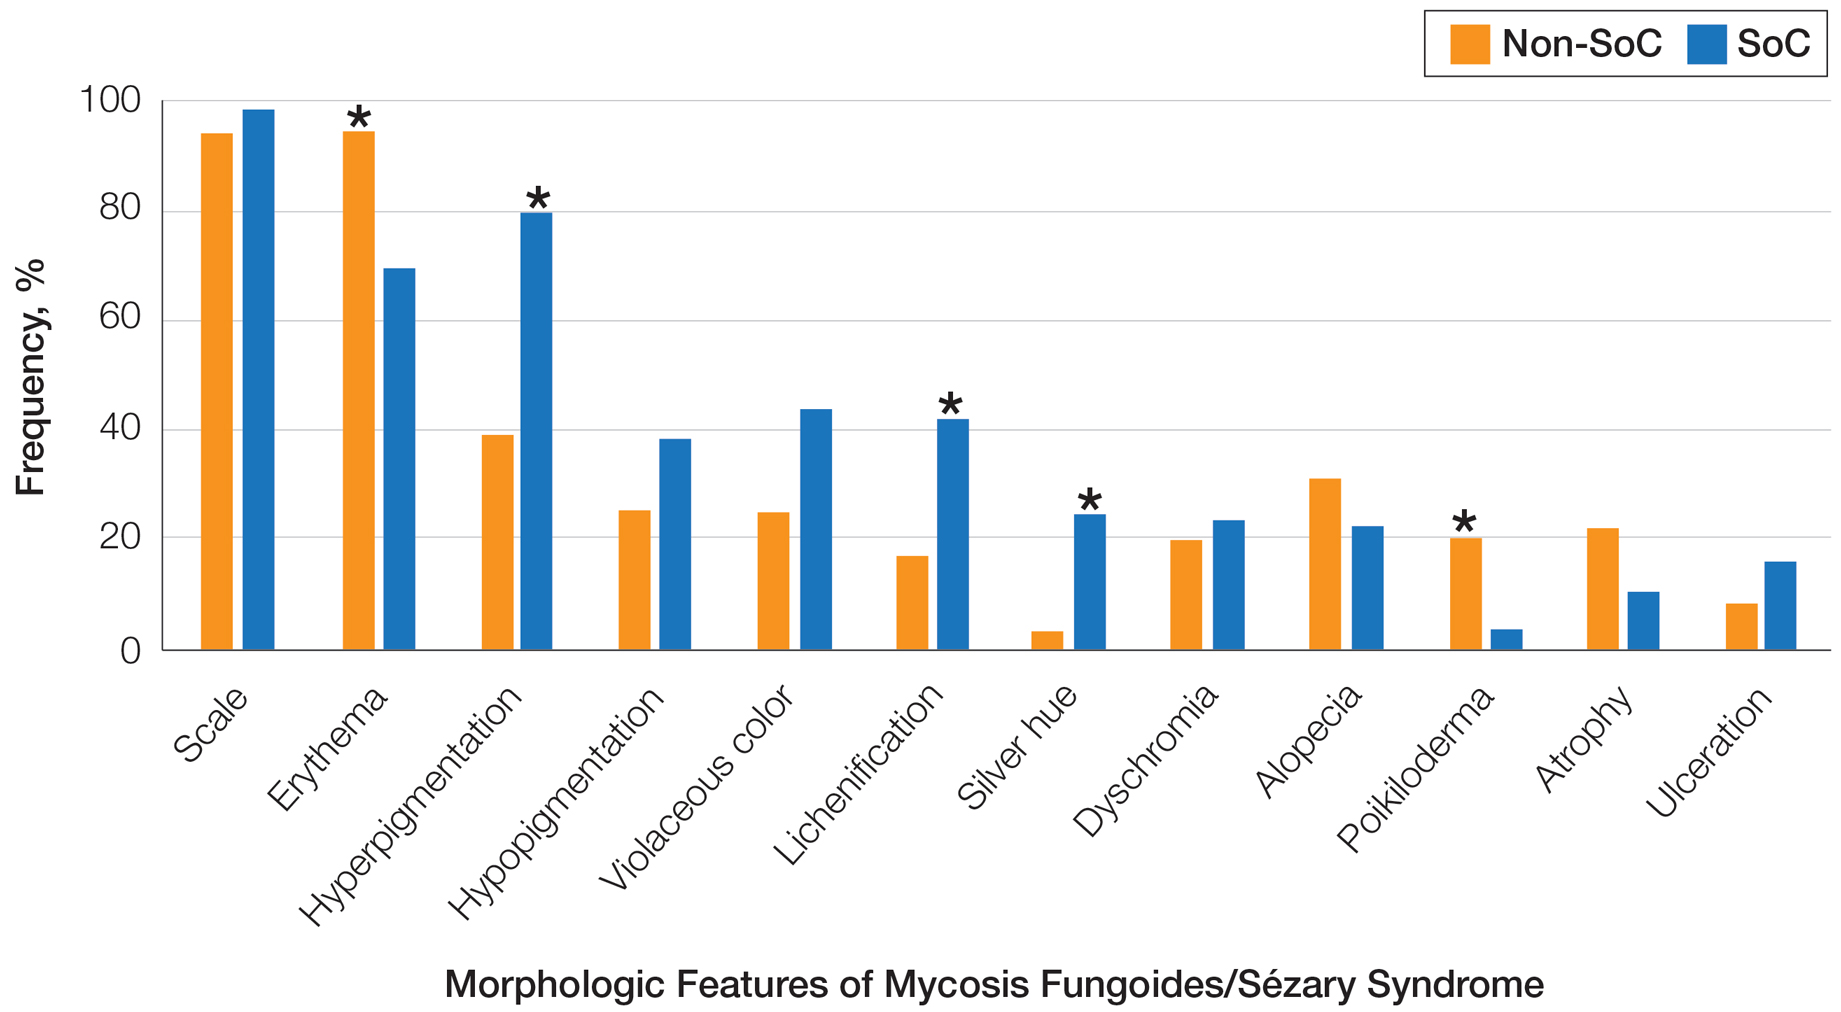 Frequency of morphologic features found in skin of color (SoC [Fitzpatrick skin types IV–VI]) vs non-SoC (Fitzpatrick skin types I–III) patients with mycosis fungoides/Sézary syndrome